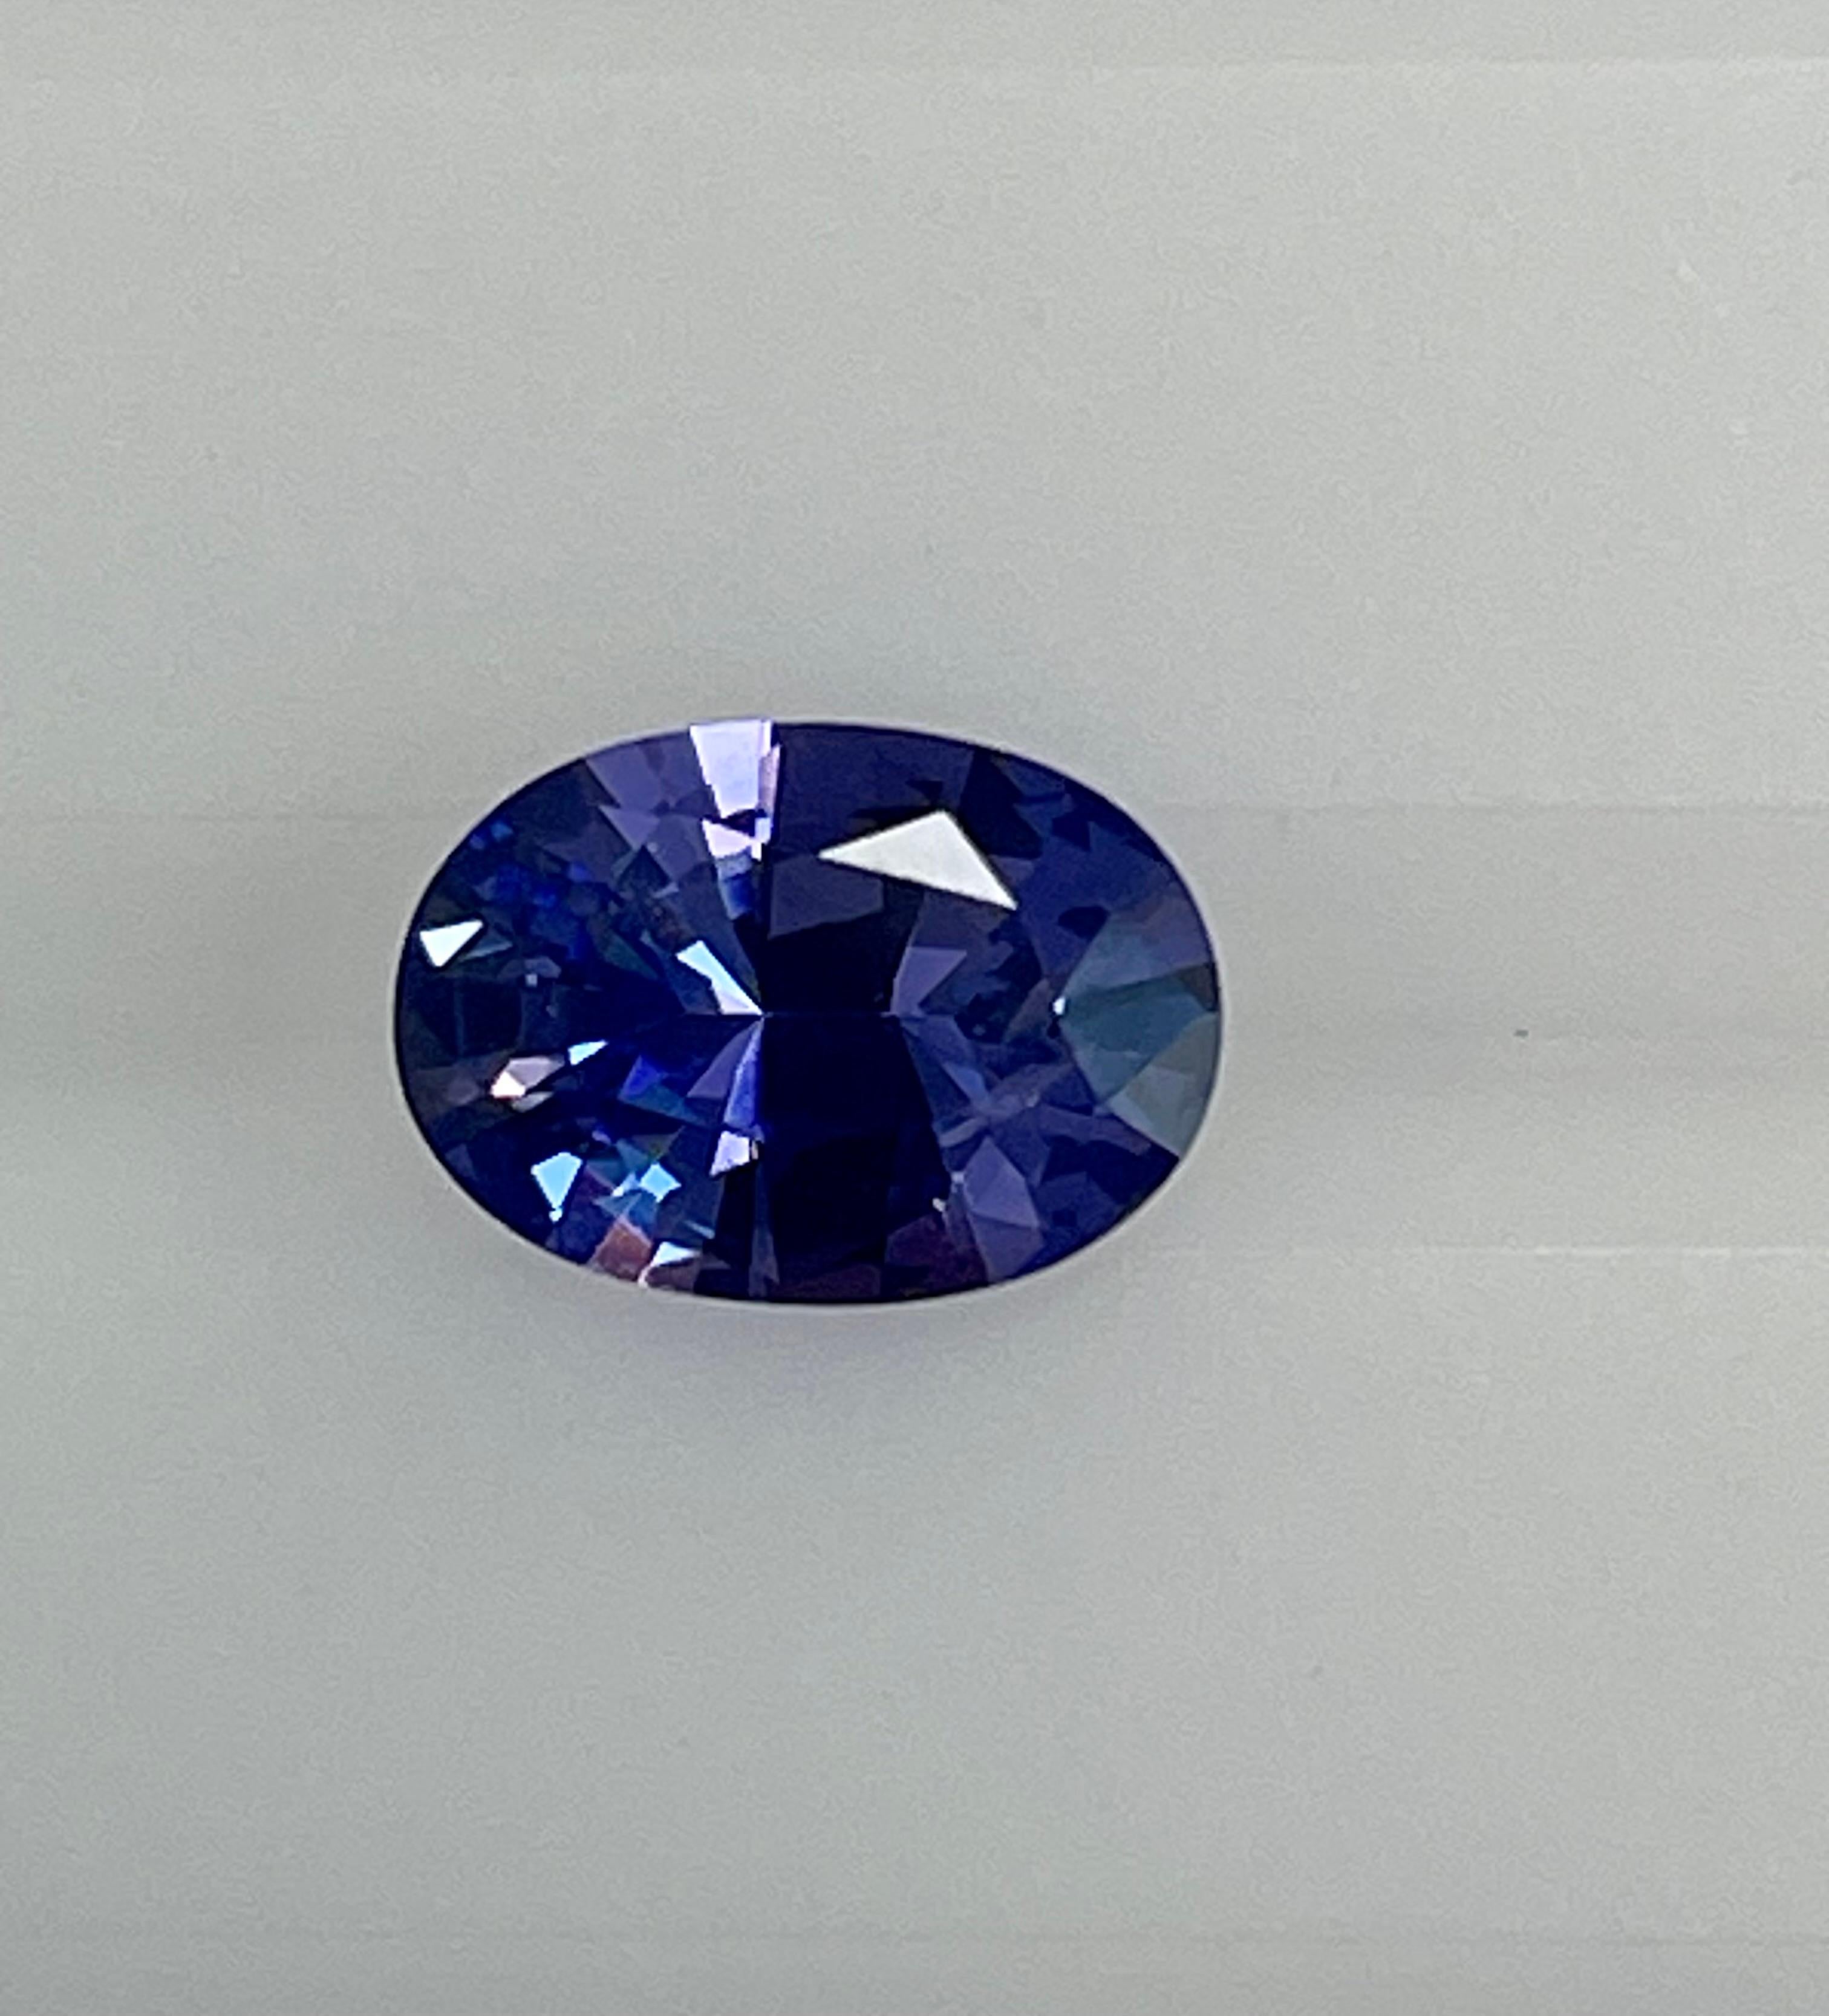 This 1.87 Ct Oval purple sapphire is one of the Varieties of colors in Sapphires and it is Natural No Heat and certified by GiA . It is so beautiful cut that exhibits great purple color and clarity which makes it very unique and beautiful sapphire.